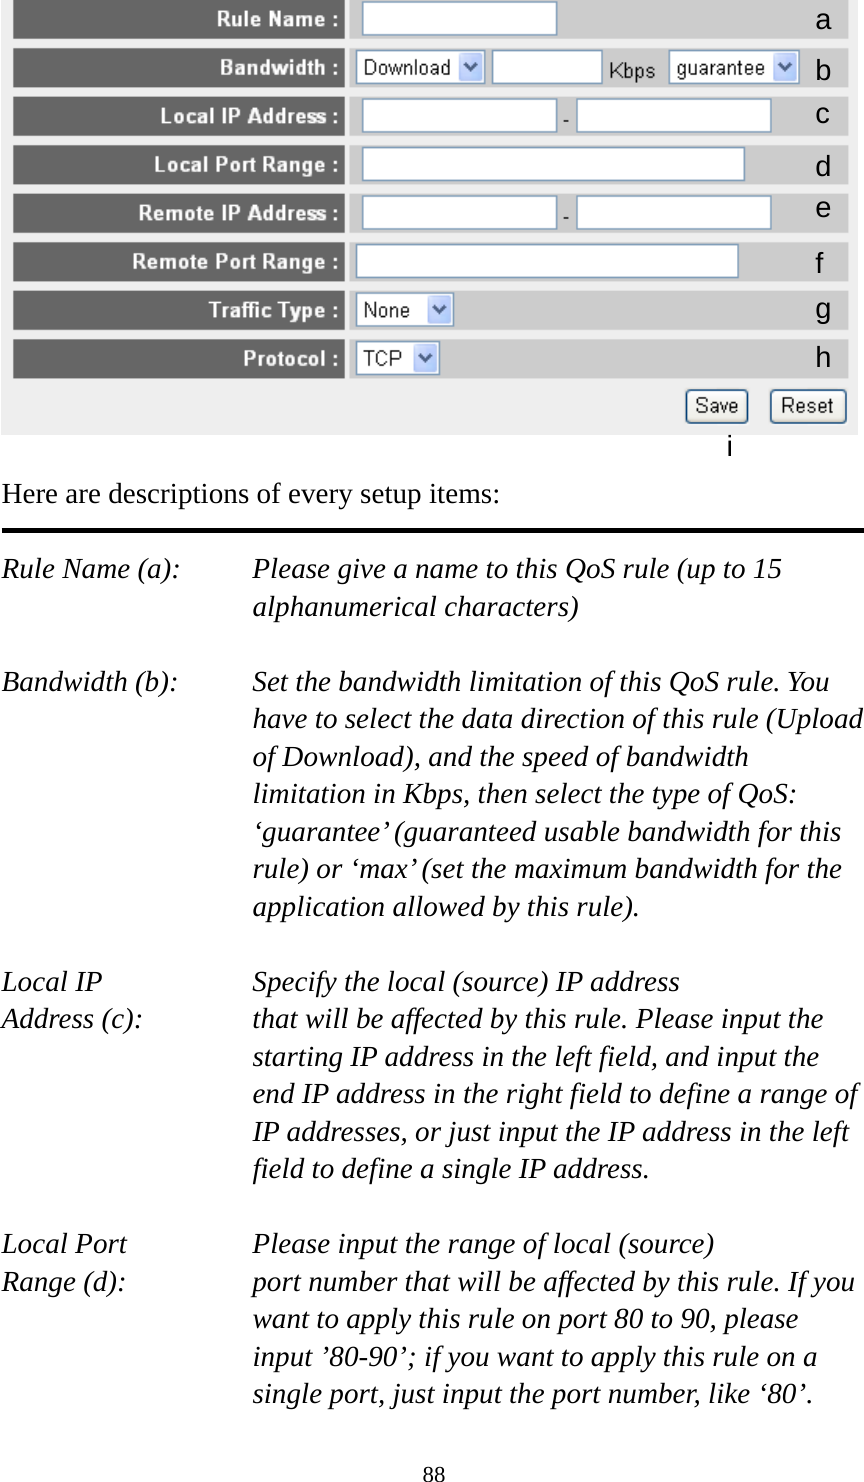 88   Here are descriptions of every setup items:  Rule Name (a):    Please give a name to this QoS rule (up to 15 alphanumerical characters)  Bandwidth (b):    Set the bandwidth limitation of this QoS rule. You have to select the data direction of this rule (Upload of Download), and the speed of bandwidth limitation in Kbps, then select the type of QoS: ‘guarantee’ (guaranteed usable bandwidth for this rule) or ‘max’ (set the maximum bandwidth for the application allowed by this rule).  Local IP        Specify the local (source) IP address Address (c):     that will be affected by this rule. Please input the starting IP address in the left field, and input the end IP address in the right field to define a range of IP addresses, or just input the IP address in the left field to define a single IP address.  Local Port       Please input the range of local (source) Range (d):    port number that will be affected by this rule. If you want to apply this rule on port 80 to 90, please input ’80-90’; if you want to apply this rule on a single port, just input the port number, like ‘80’. a b c d e f g h i 